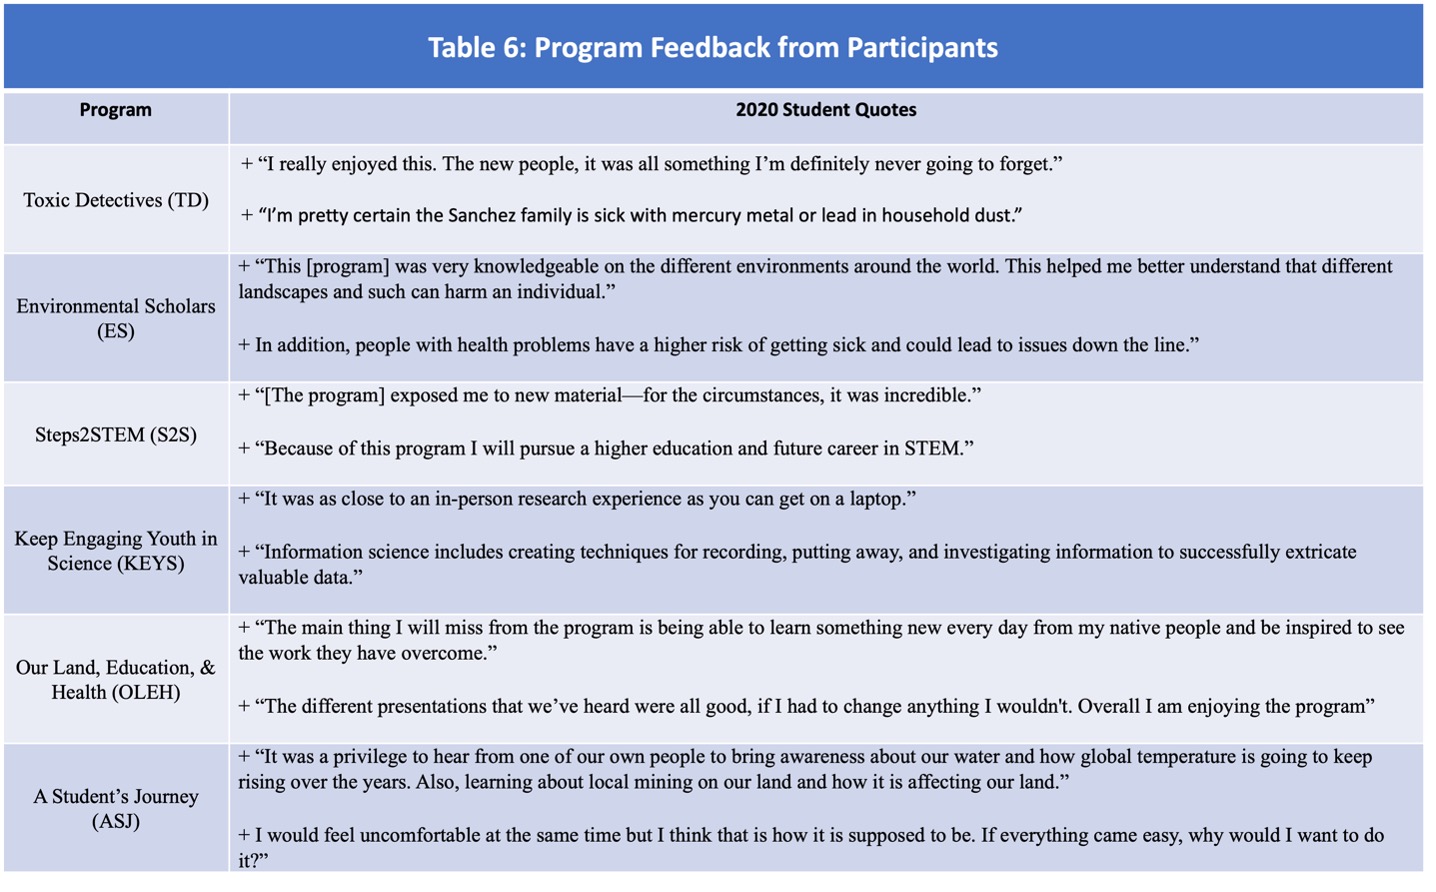 Program feedback from participants